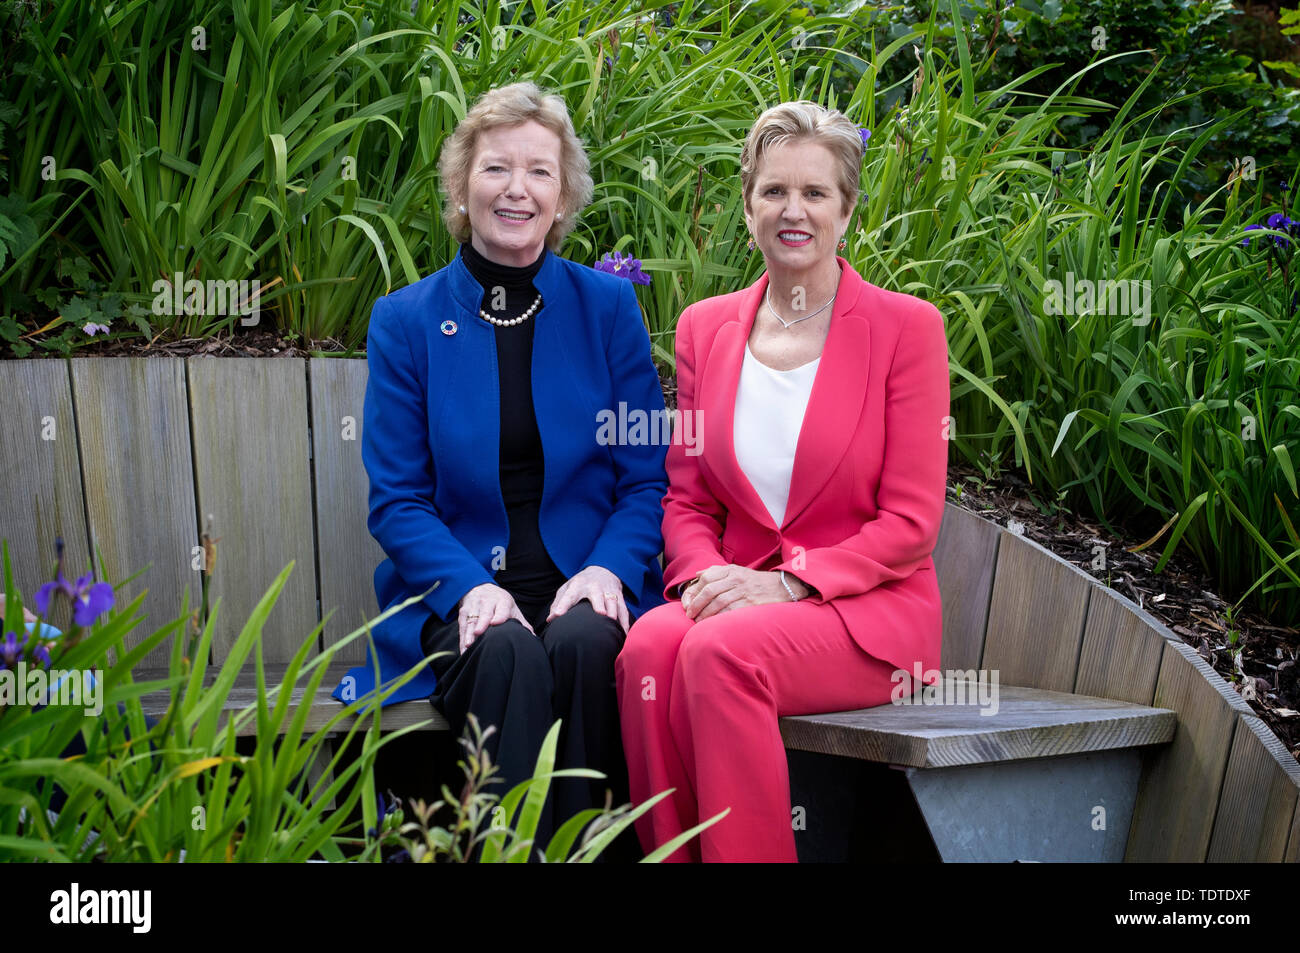 Former Irish president Dr Mary Robinson (left) with human rights activist Dr Kerry Kennedy at the World Forum on Climate Justice event at Glasgow Caledonian University, Glasgow, where they addressed leading climate change academics. Stock Photo